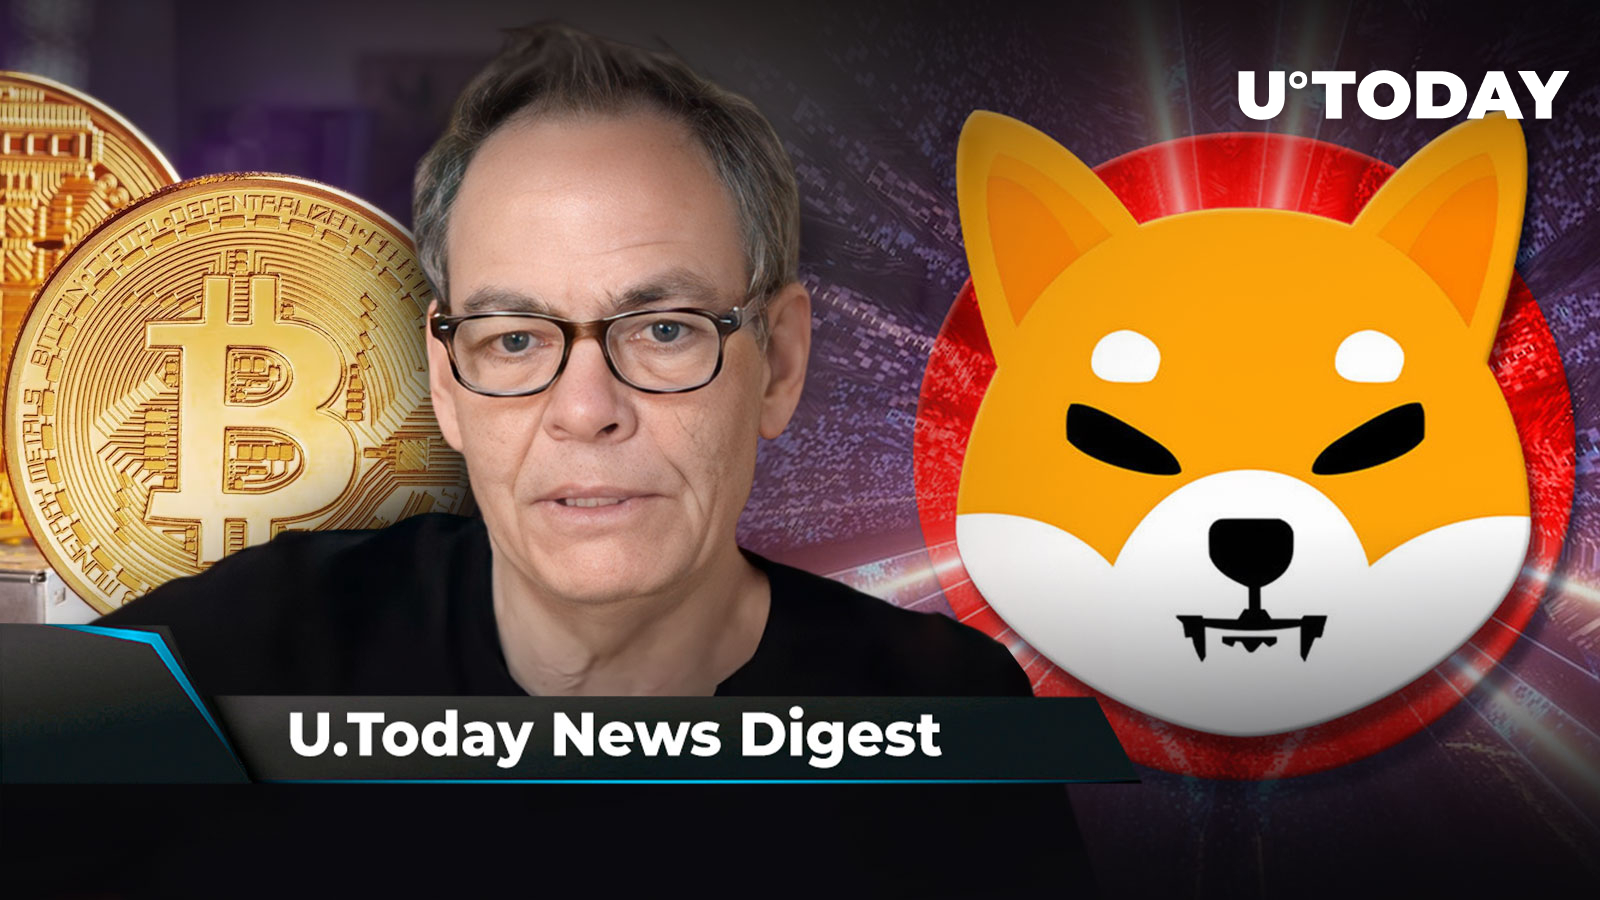 Millions of Businesses Can Now Accept SHIB, BTC to Break ,000 Max Keiser Says, SHIB Metaverse Advisor Meets Paramount Futurist: Crypto News Digest by U.Today